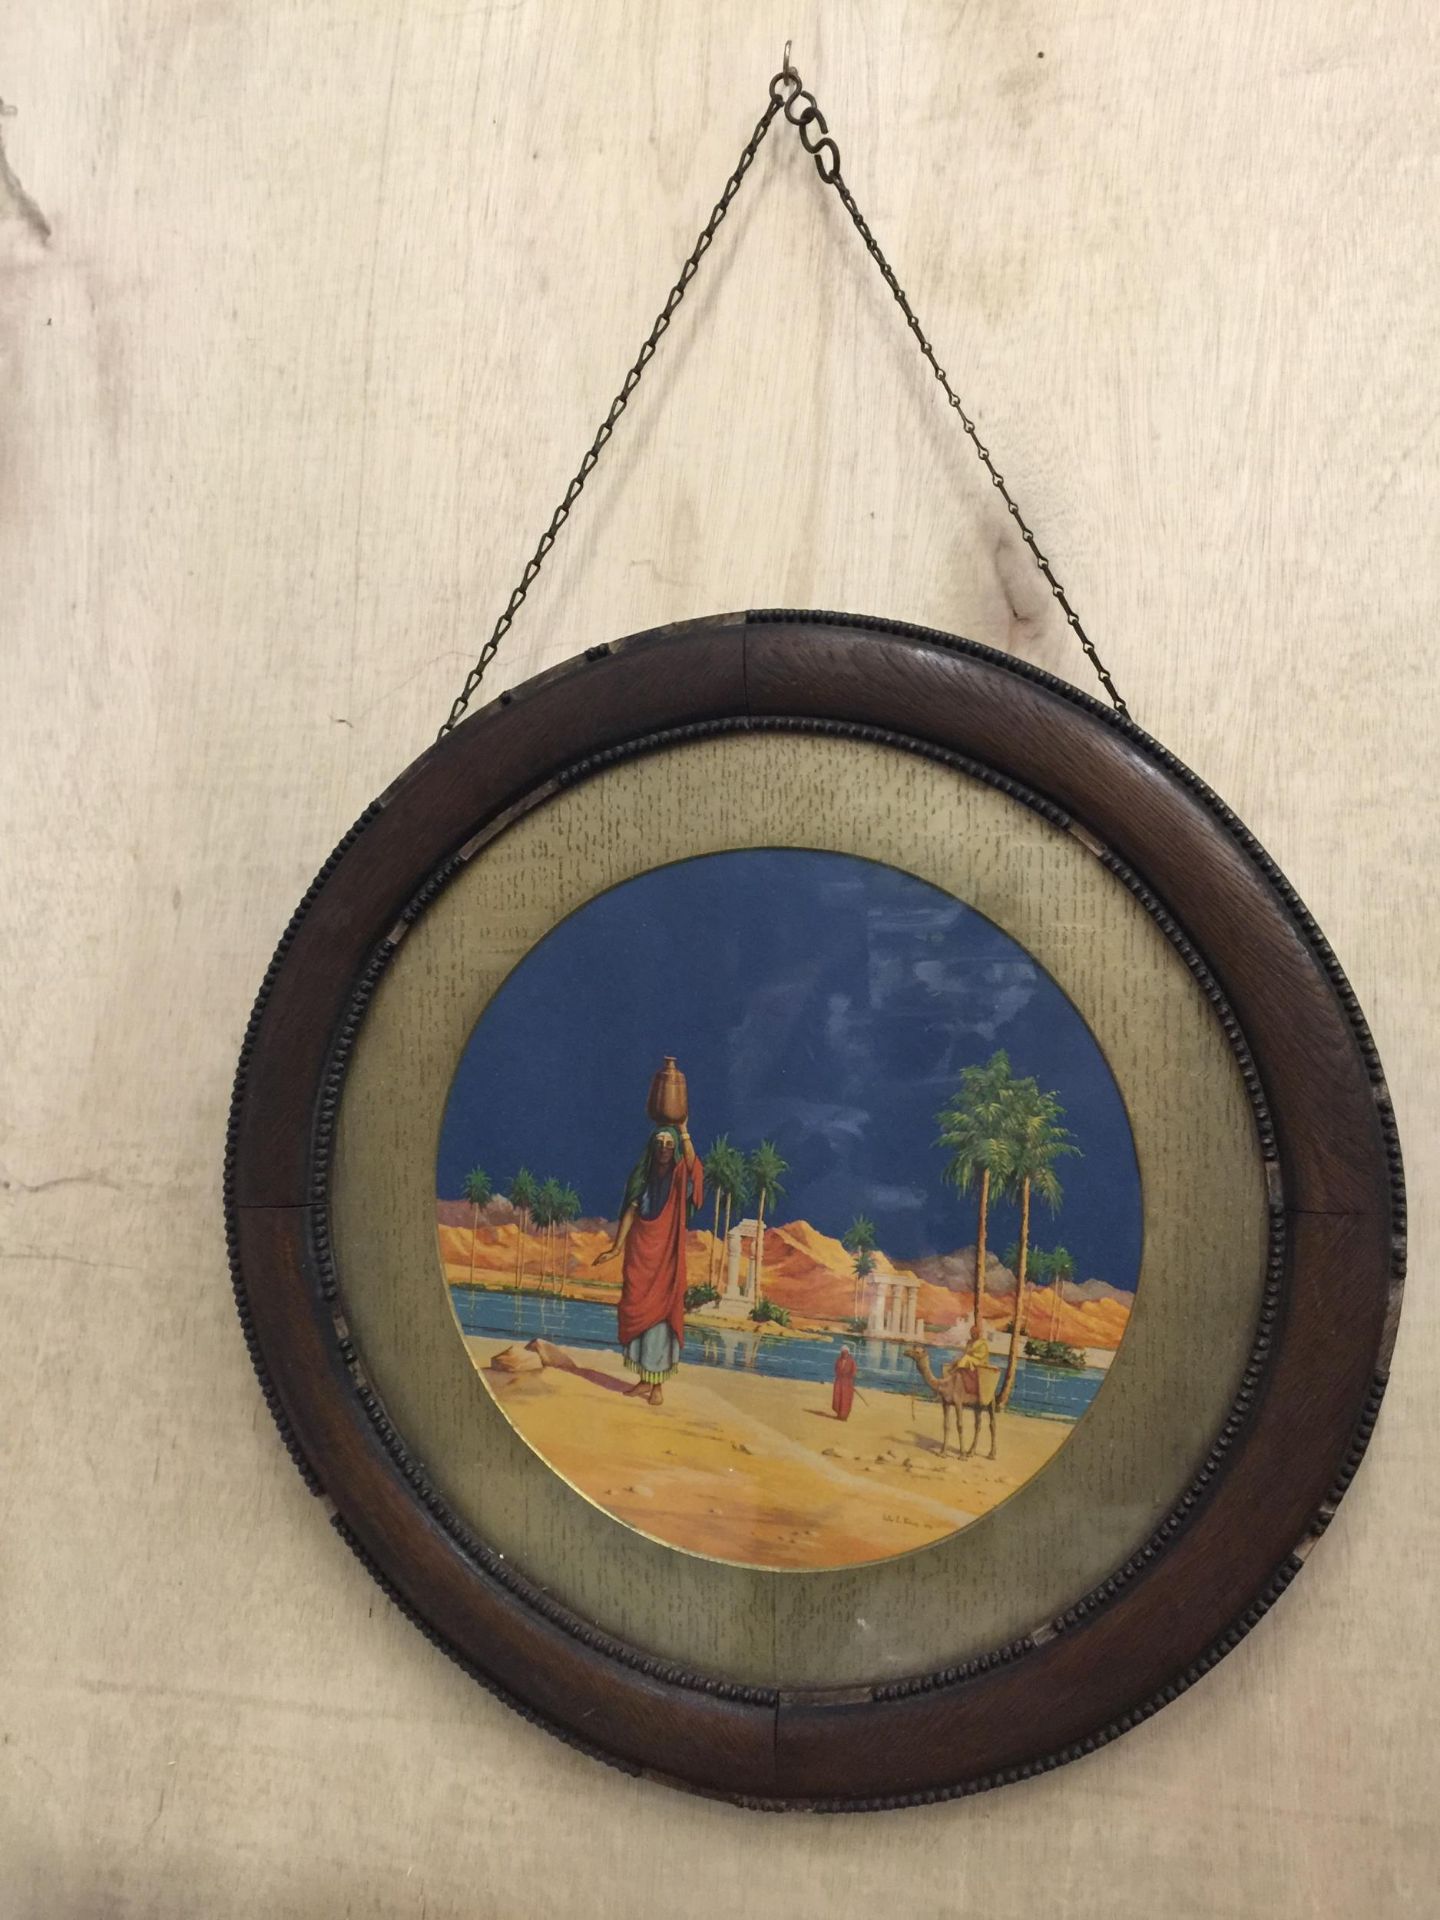 A 1923 CIRCULAR OAK WALL PLAQUE WITH ART WORK BY VICTOR E PIKUP